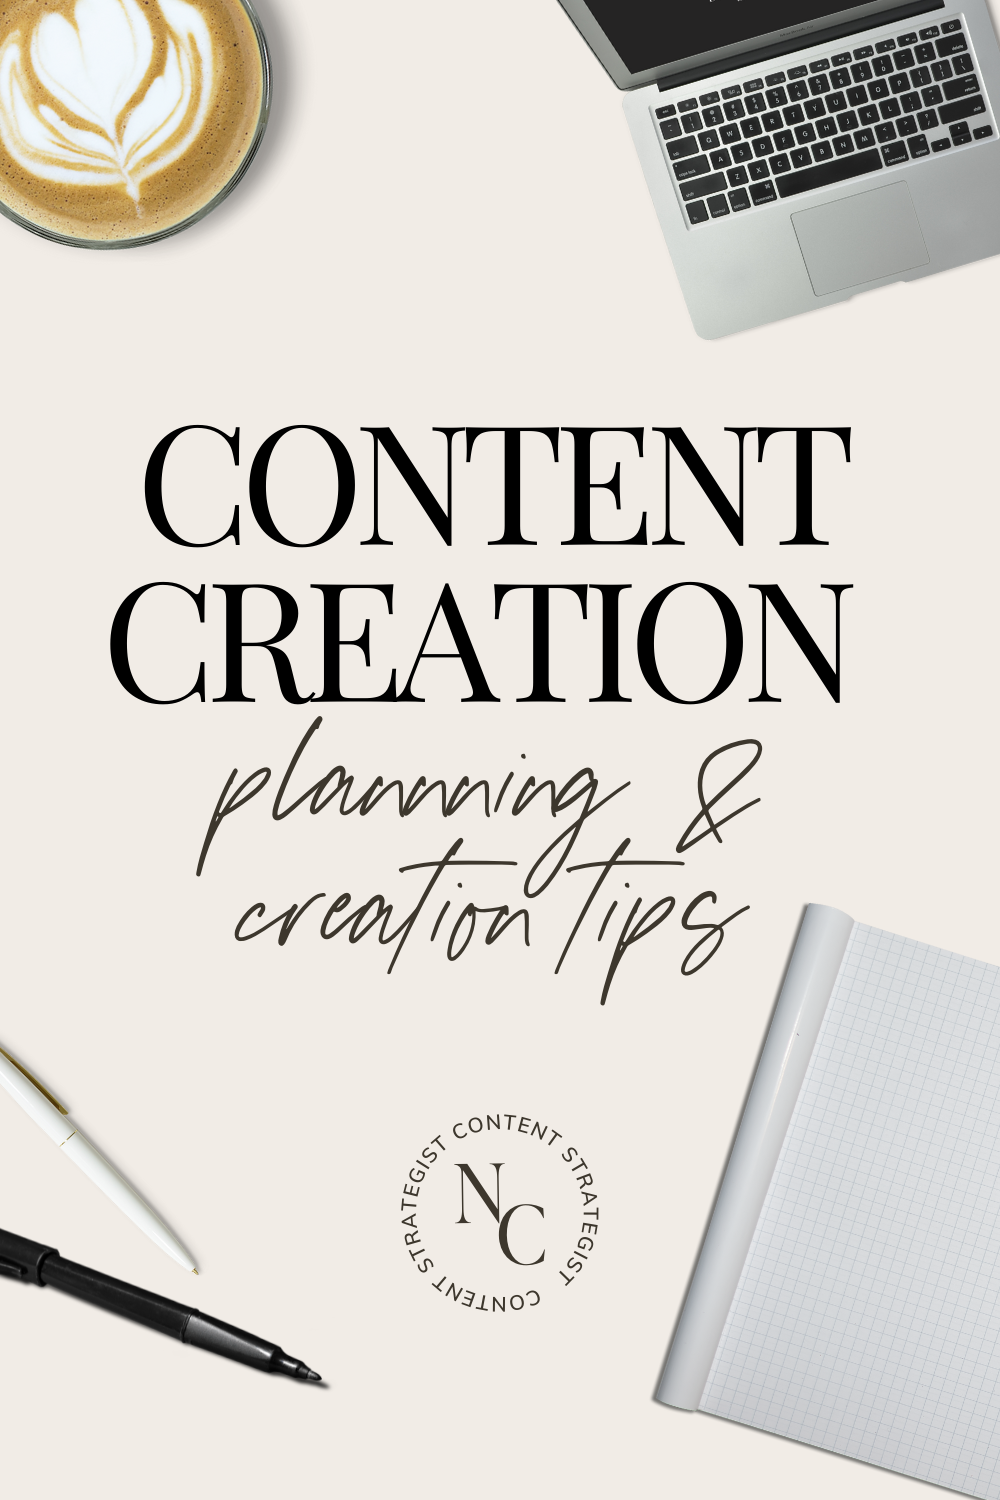 Learn how you can implement a system to help you generate endless content ideas and a workflow that helps you stay consistent and create content with confidence and ease.

